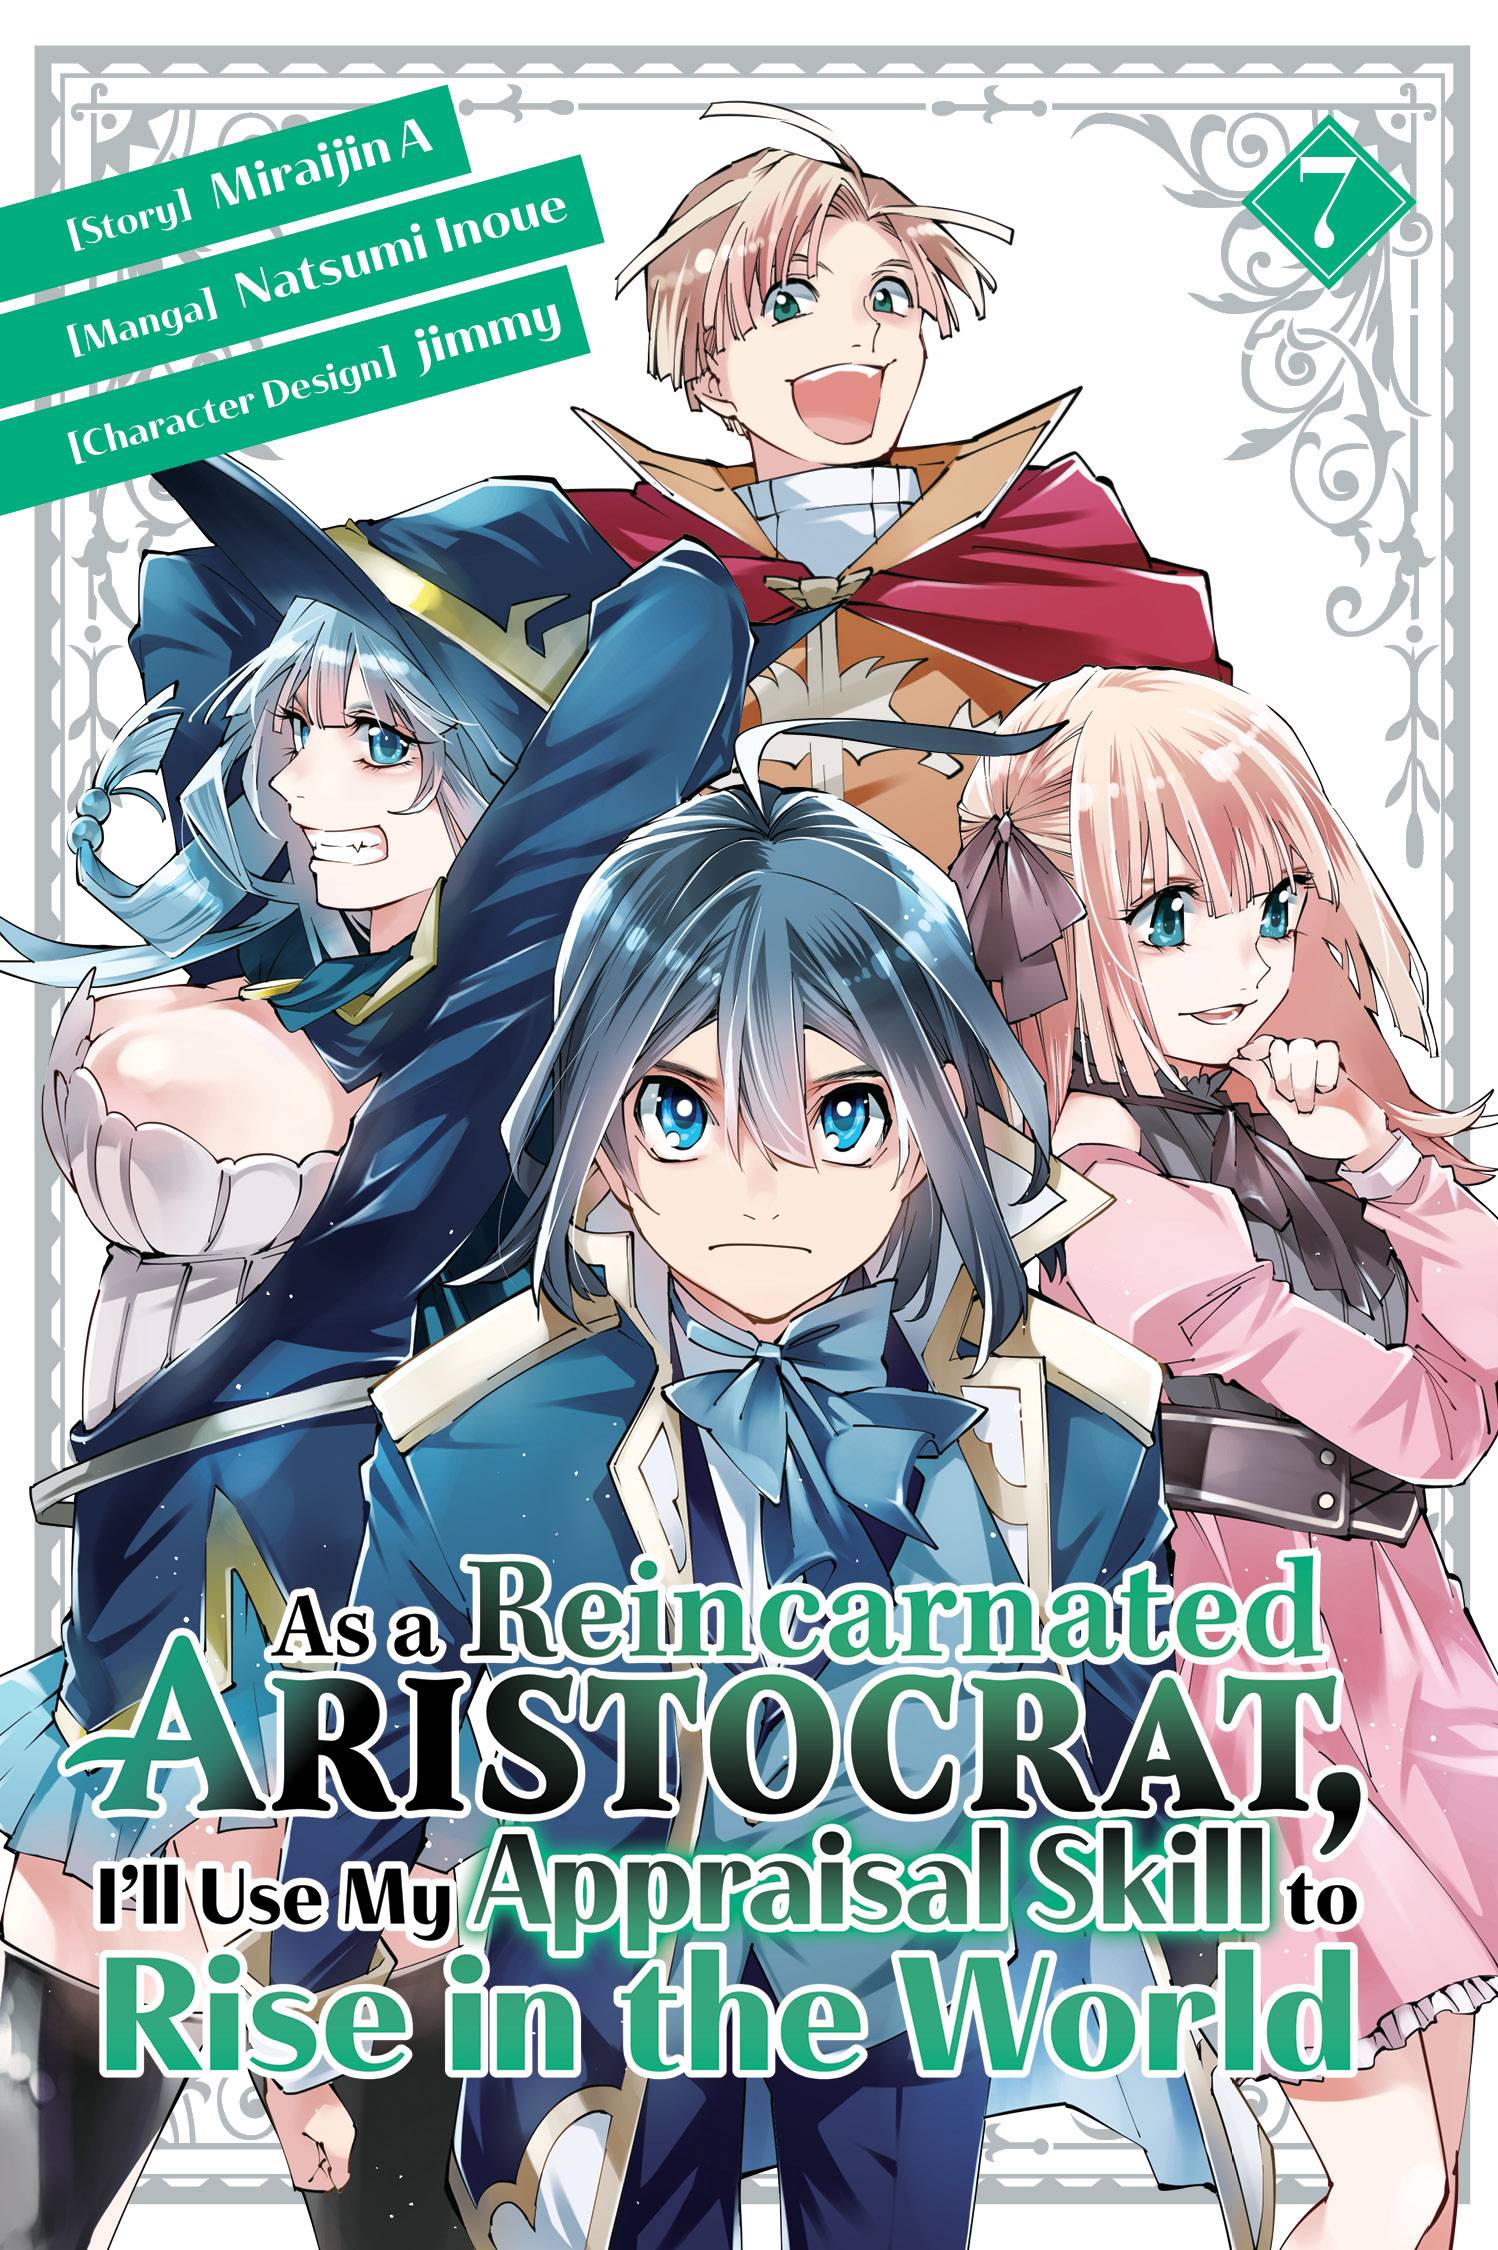 AS A REINCARNATED ARISTOCRAT USE APPRAISAL SKILL GN 07